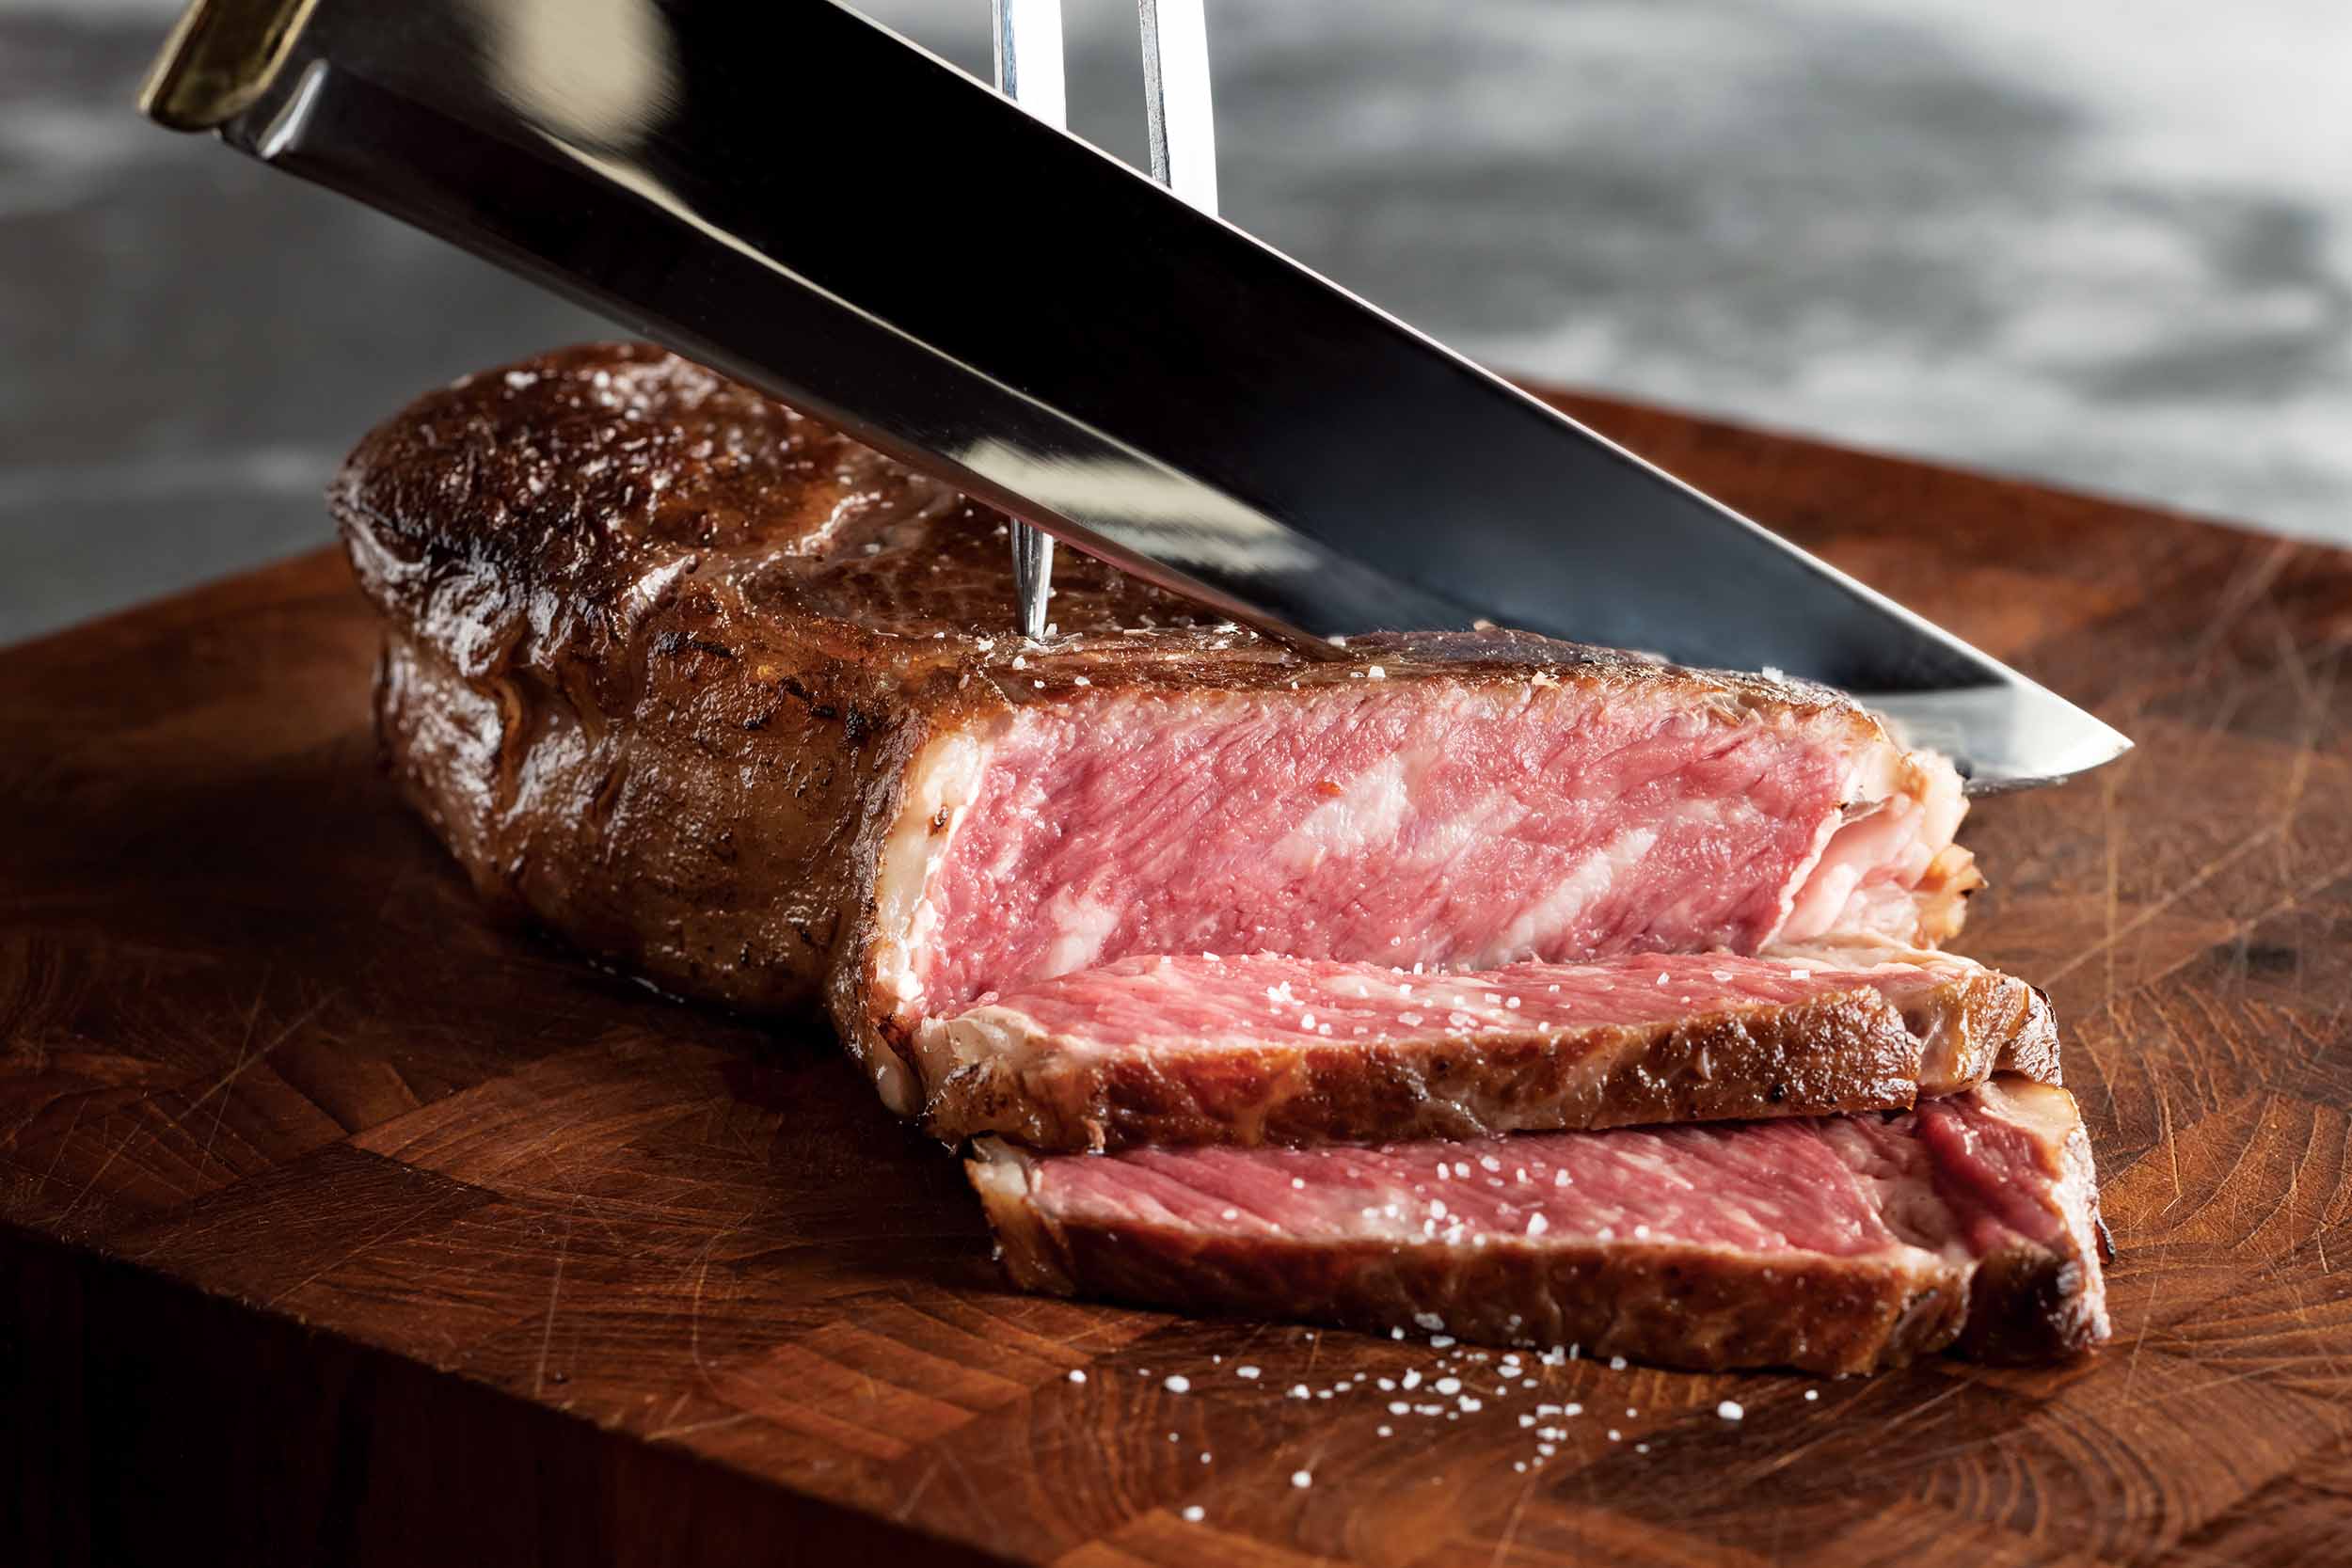 https://fogodechao.com/wp-content/uploads/2022/03/Wagyu_NY_Strip_low-res.jpg